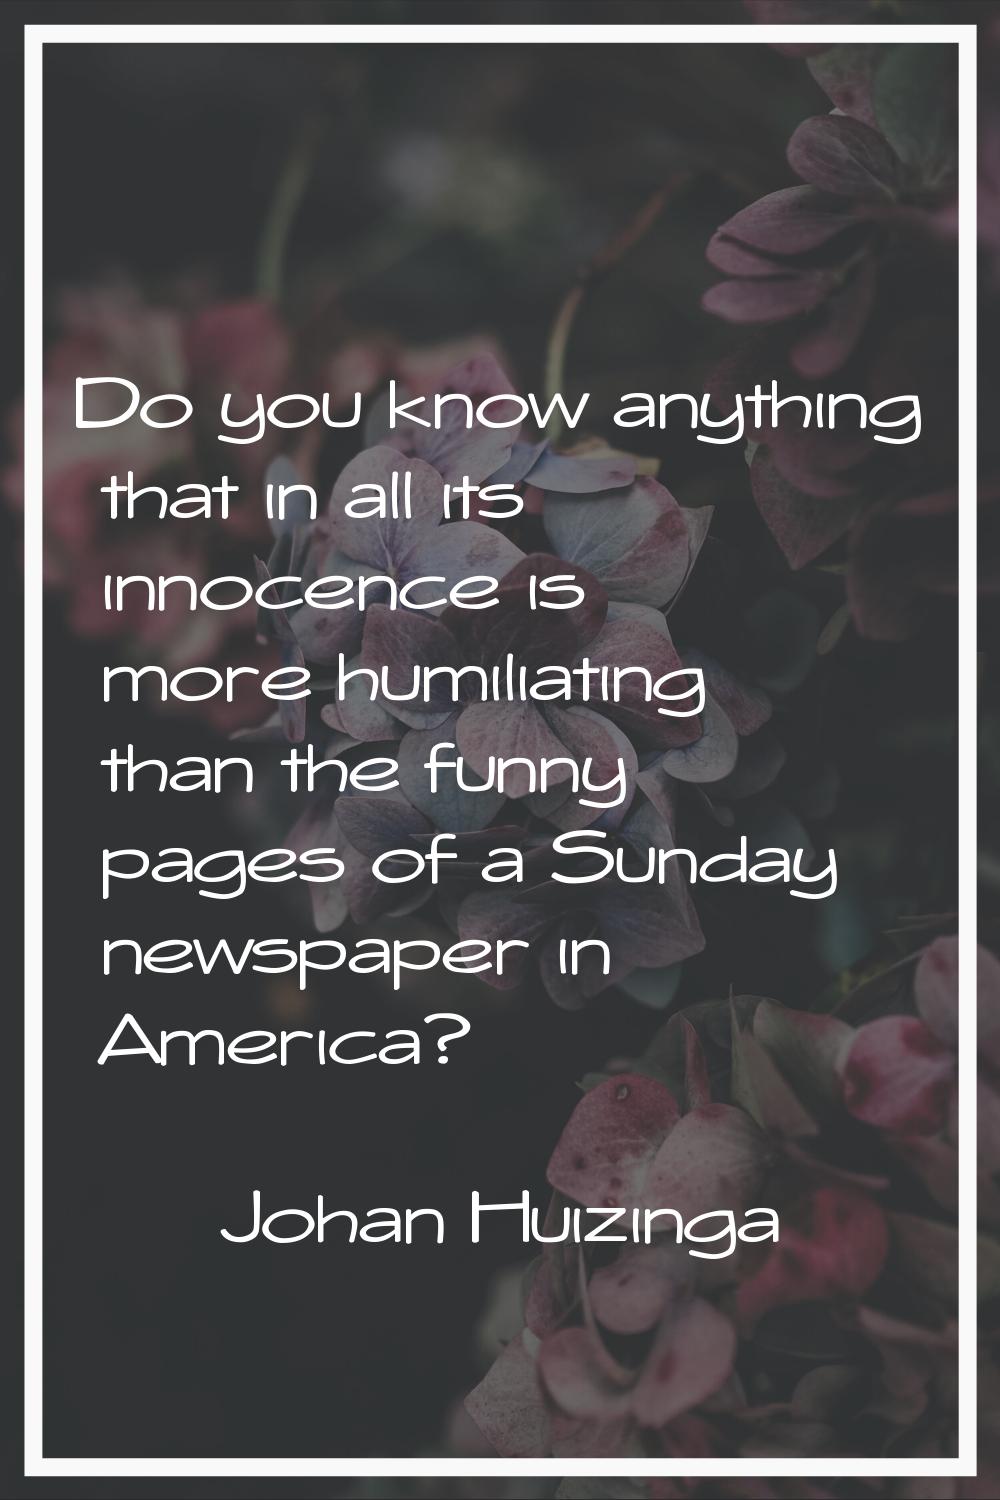 Do you know anything that in all its innocence is more humiliating than the funny pages of a Sunday